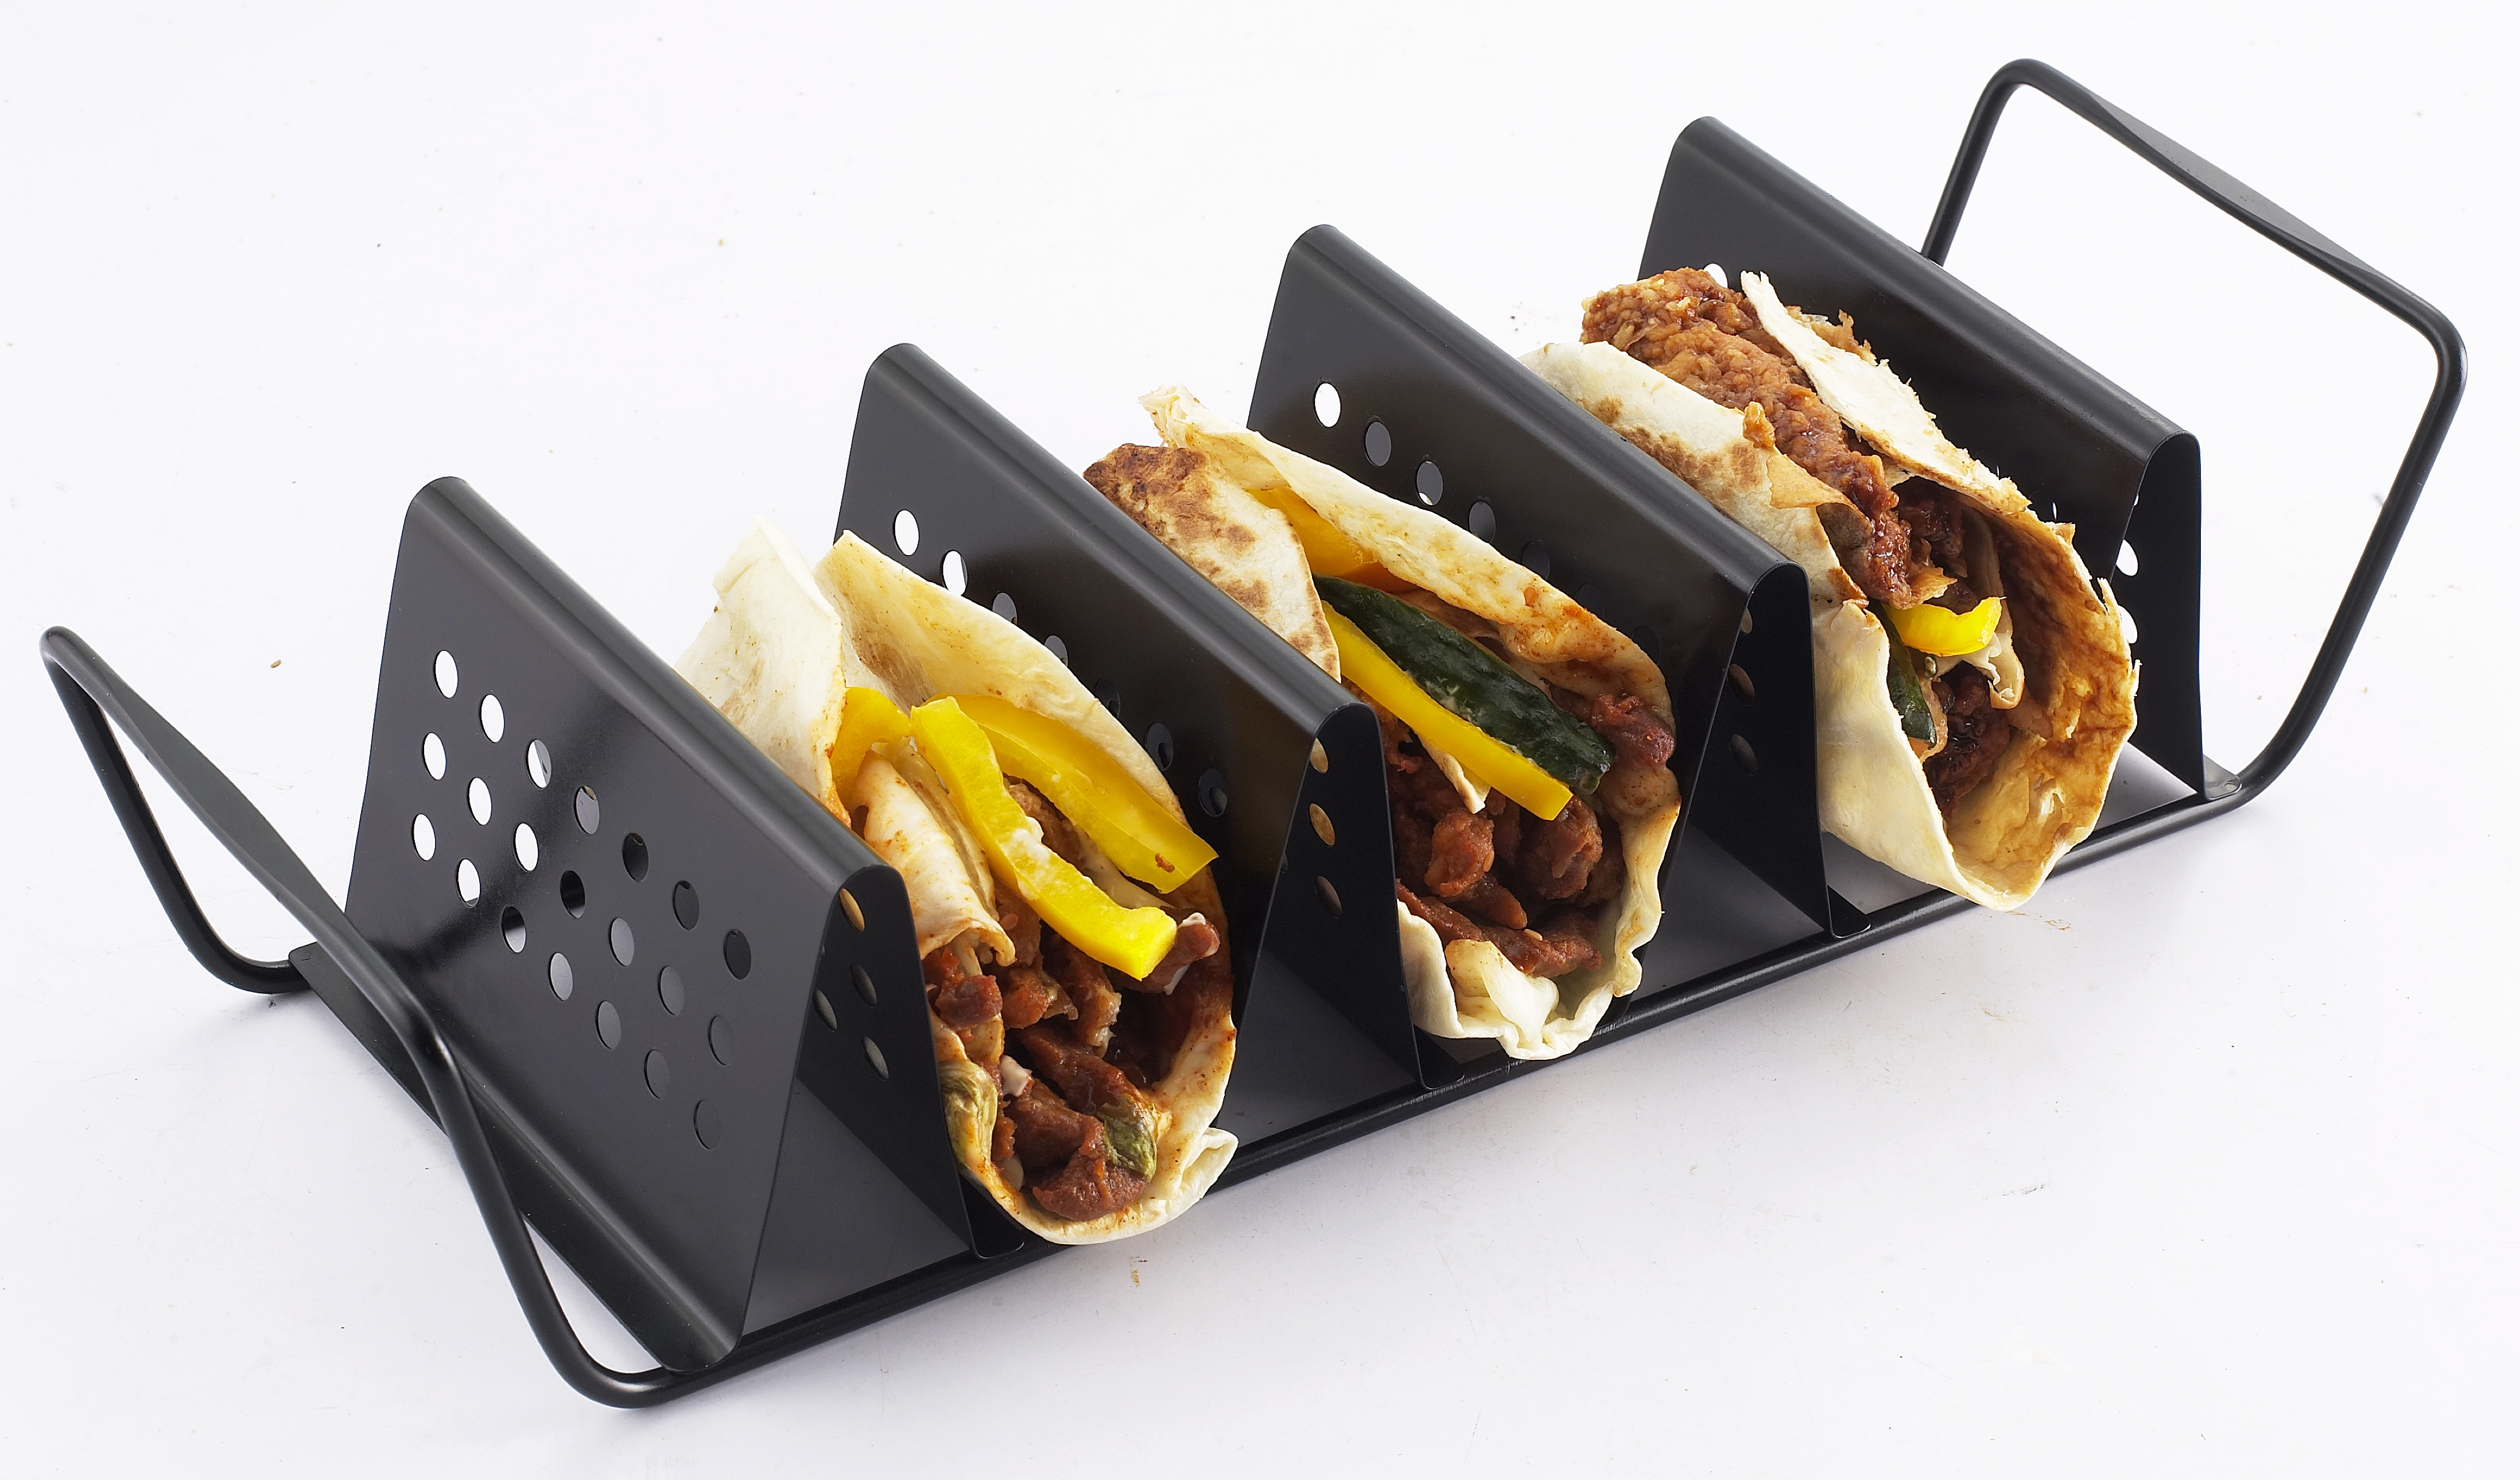 BBQ 870015 3-Taco Cooking Grill Rack, Nonstick